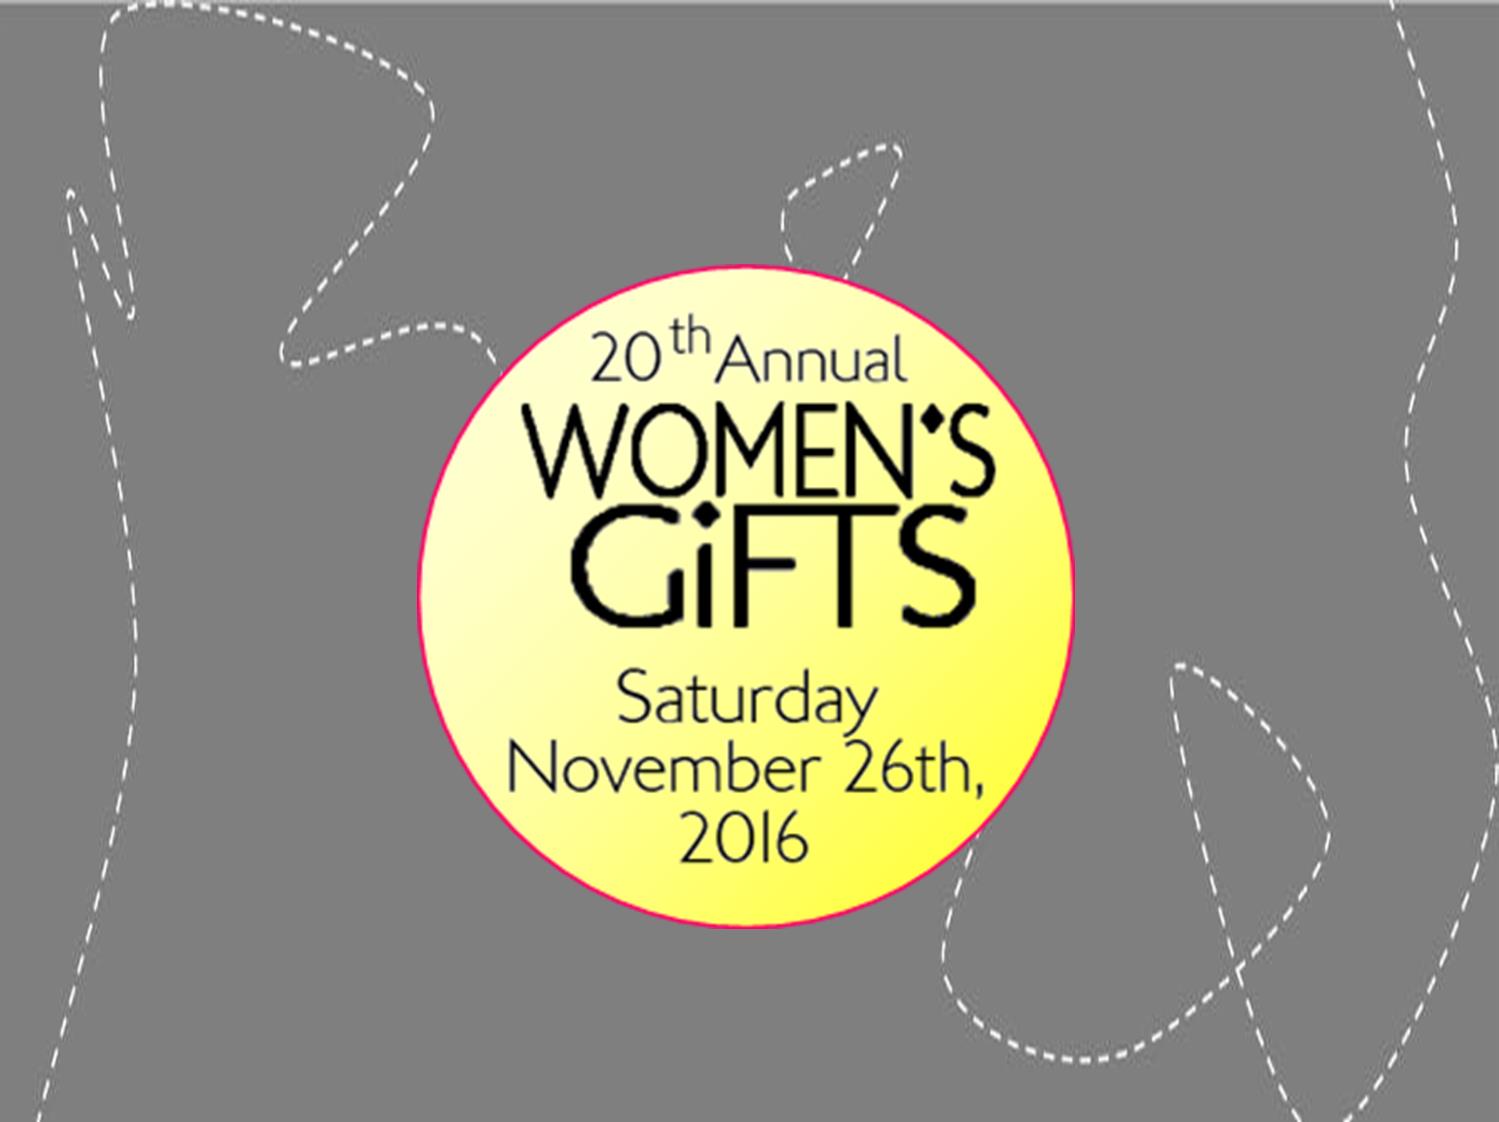 20th Annual Women's Gifts